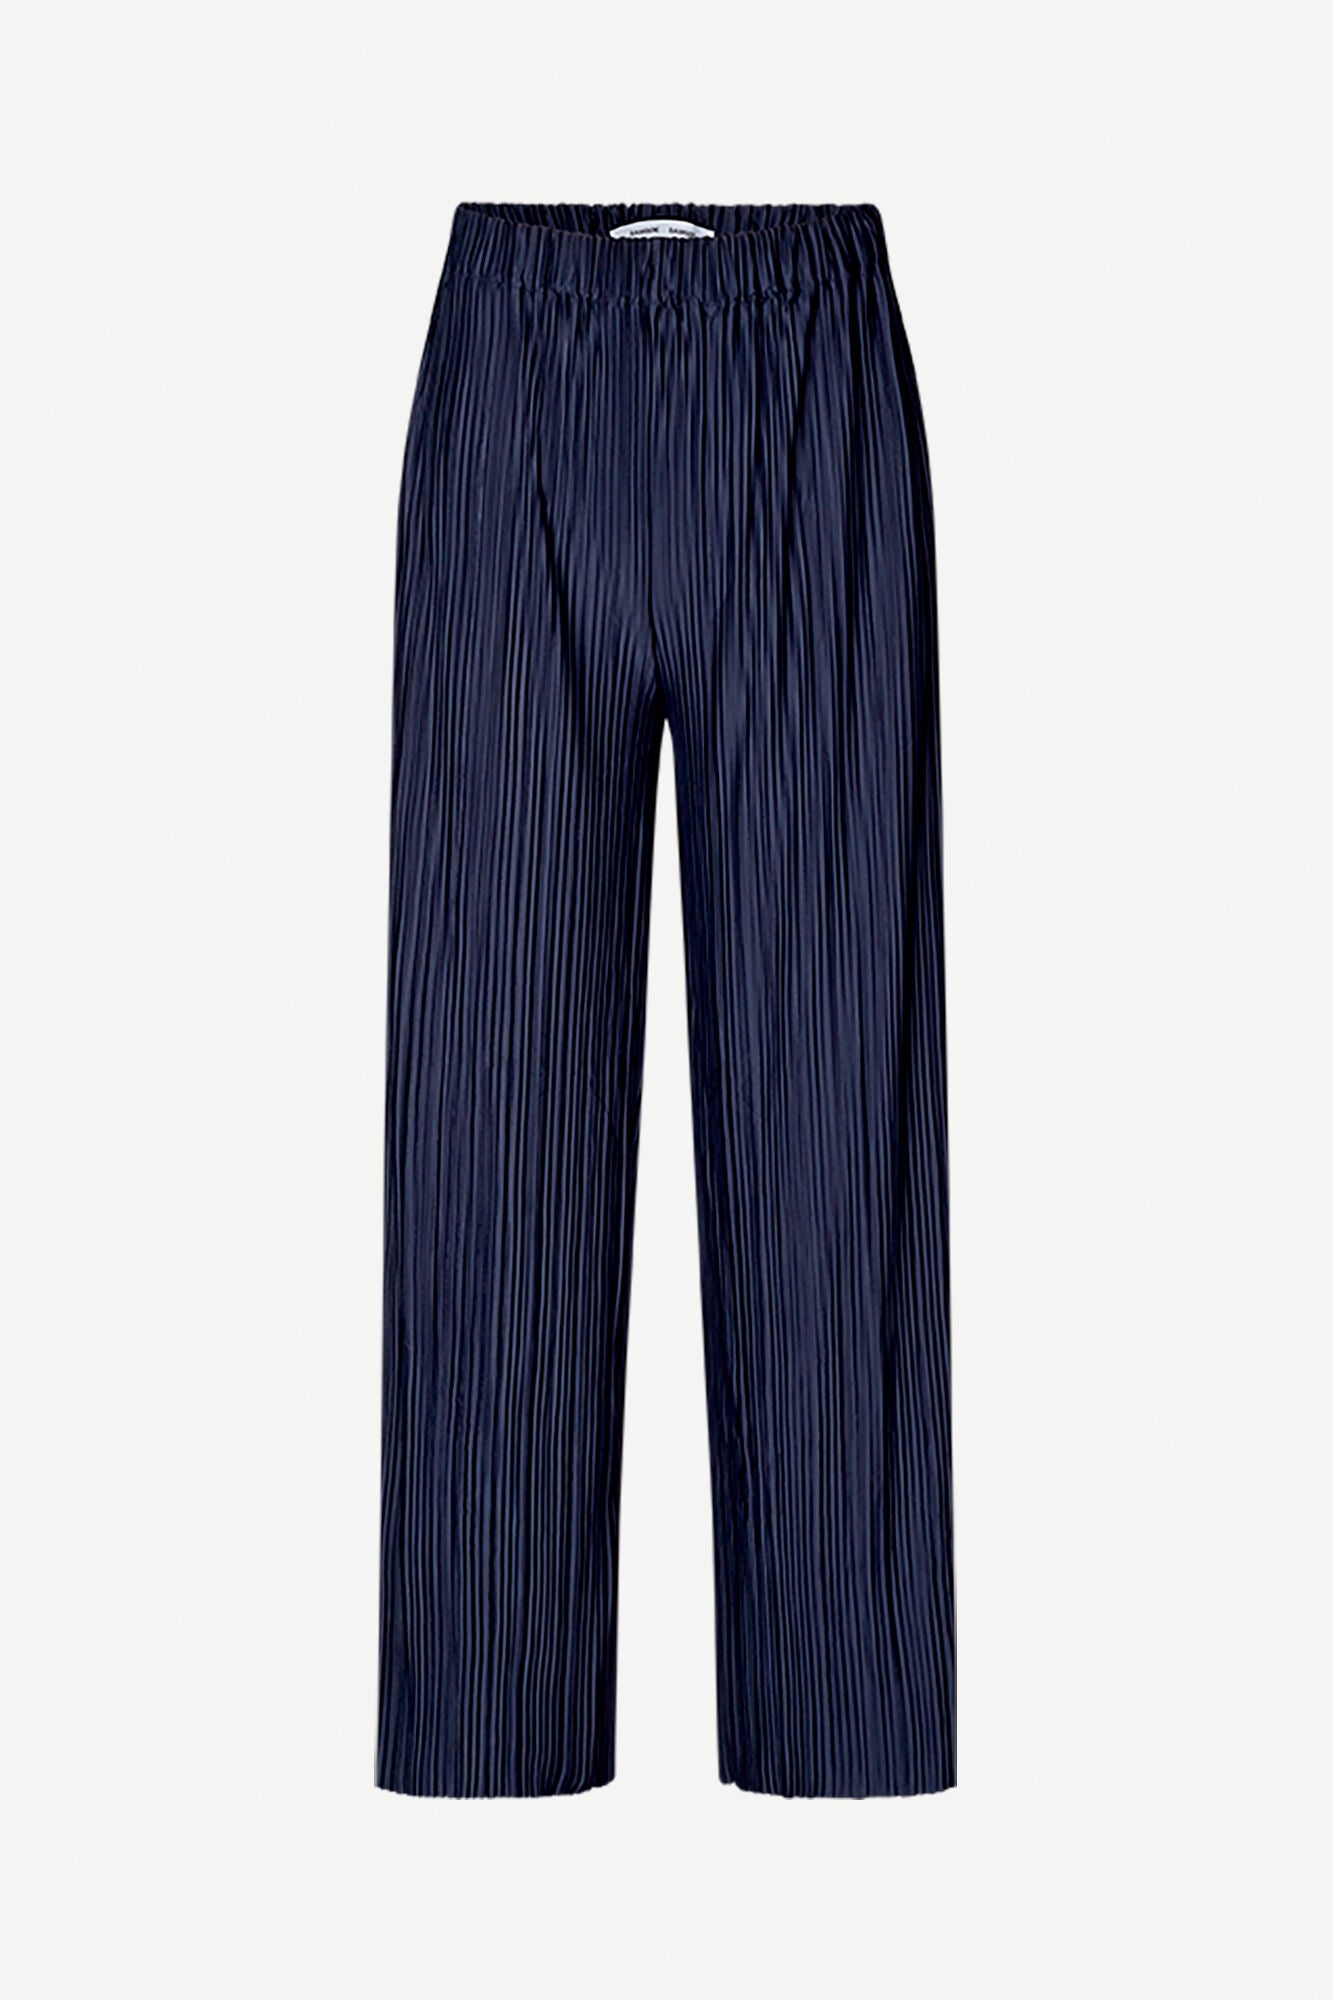 Pleated trousers in night sky